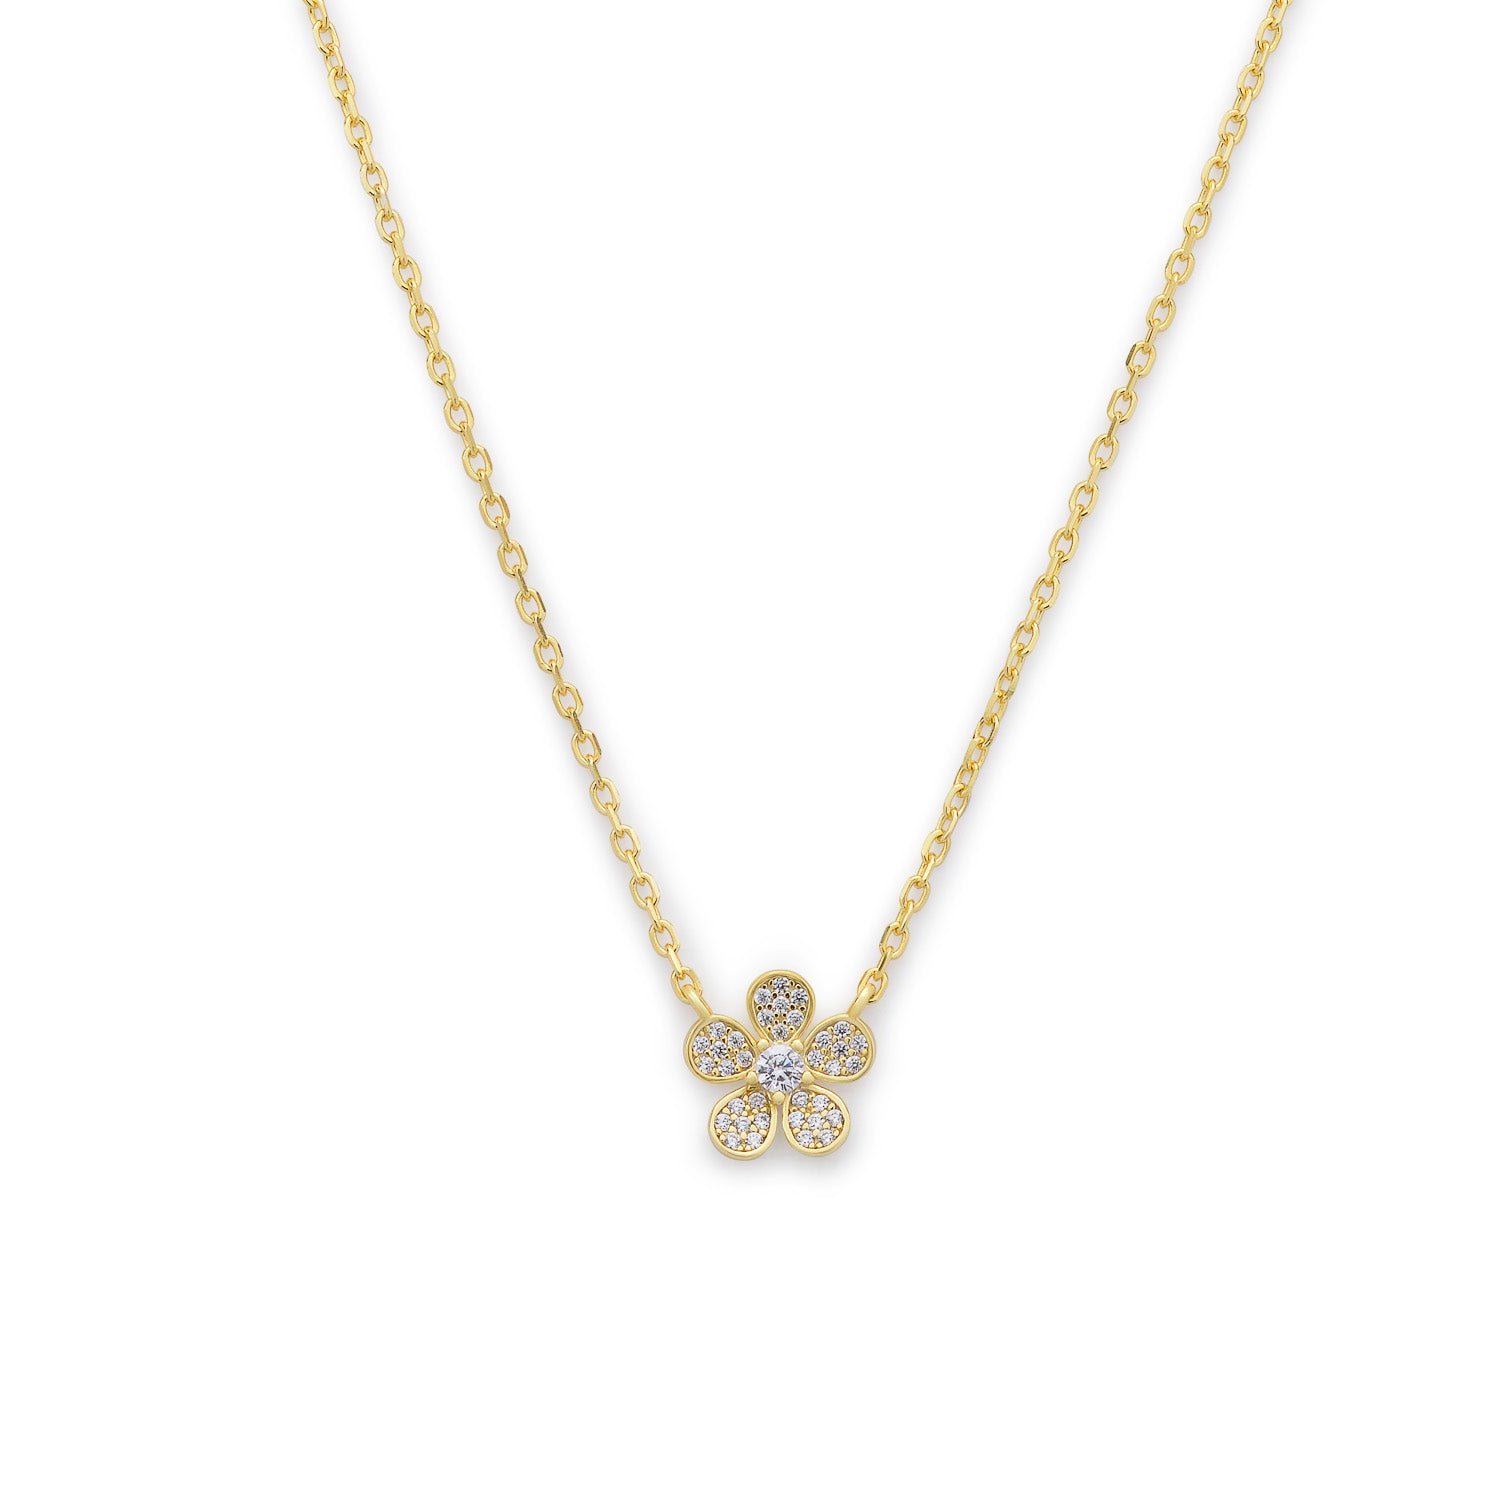 Daisy Gold Necklace with Cubic Zirconia